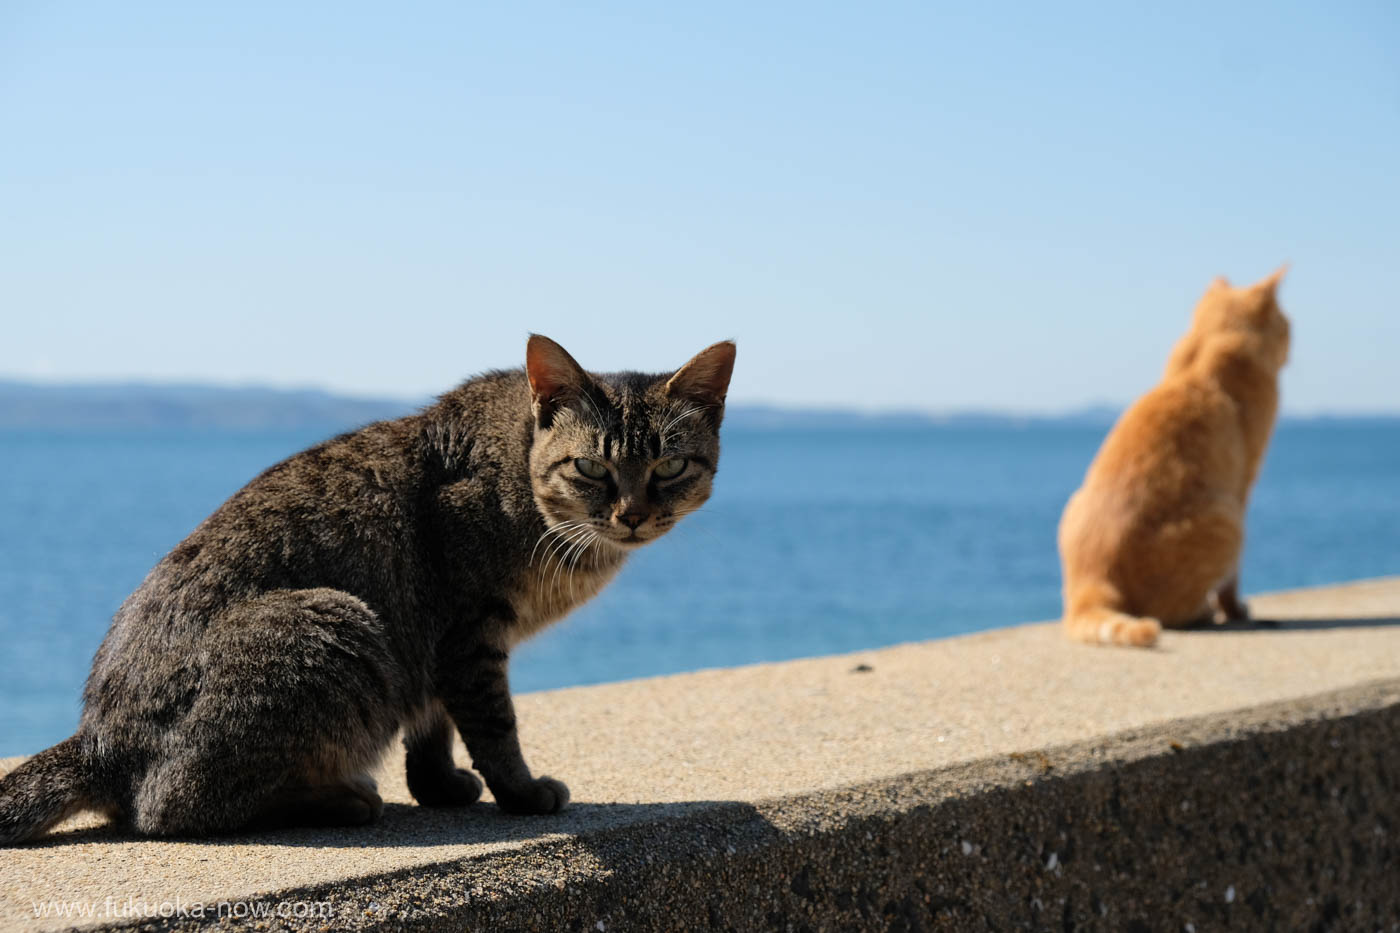 Itoshima Himeshima - the island is filled with friendly furry felines, 糸島の姫島のまちねこ